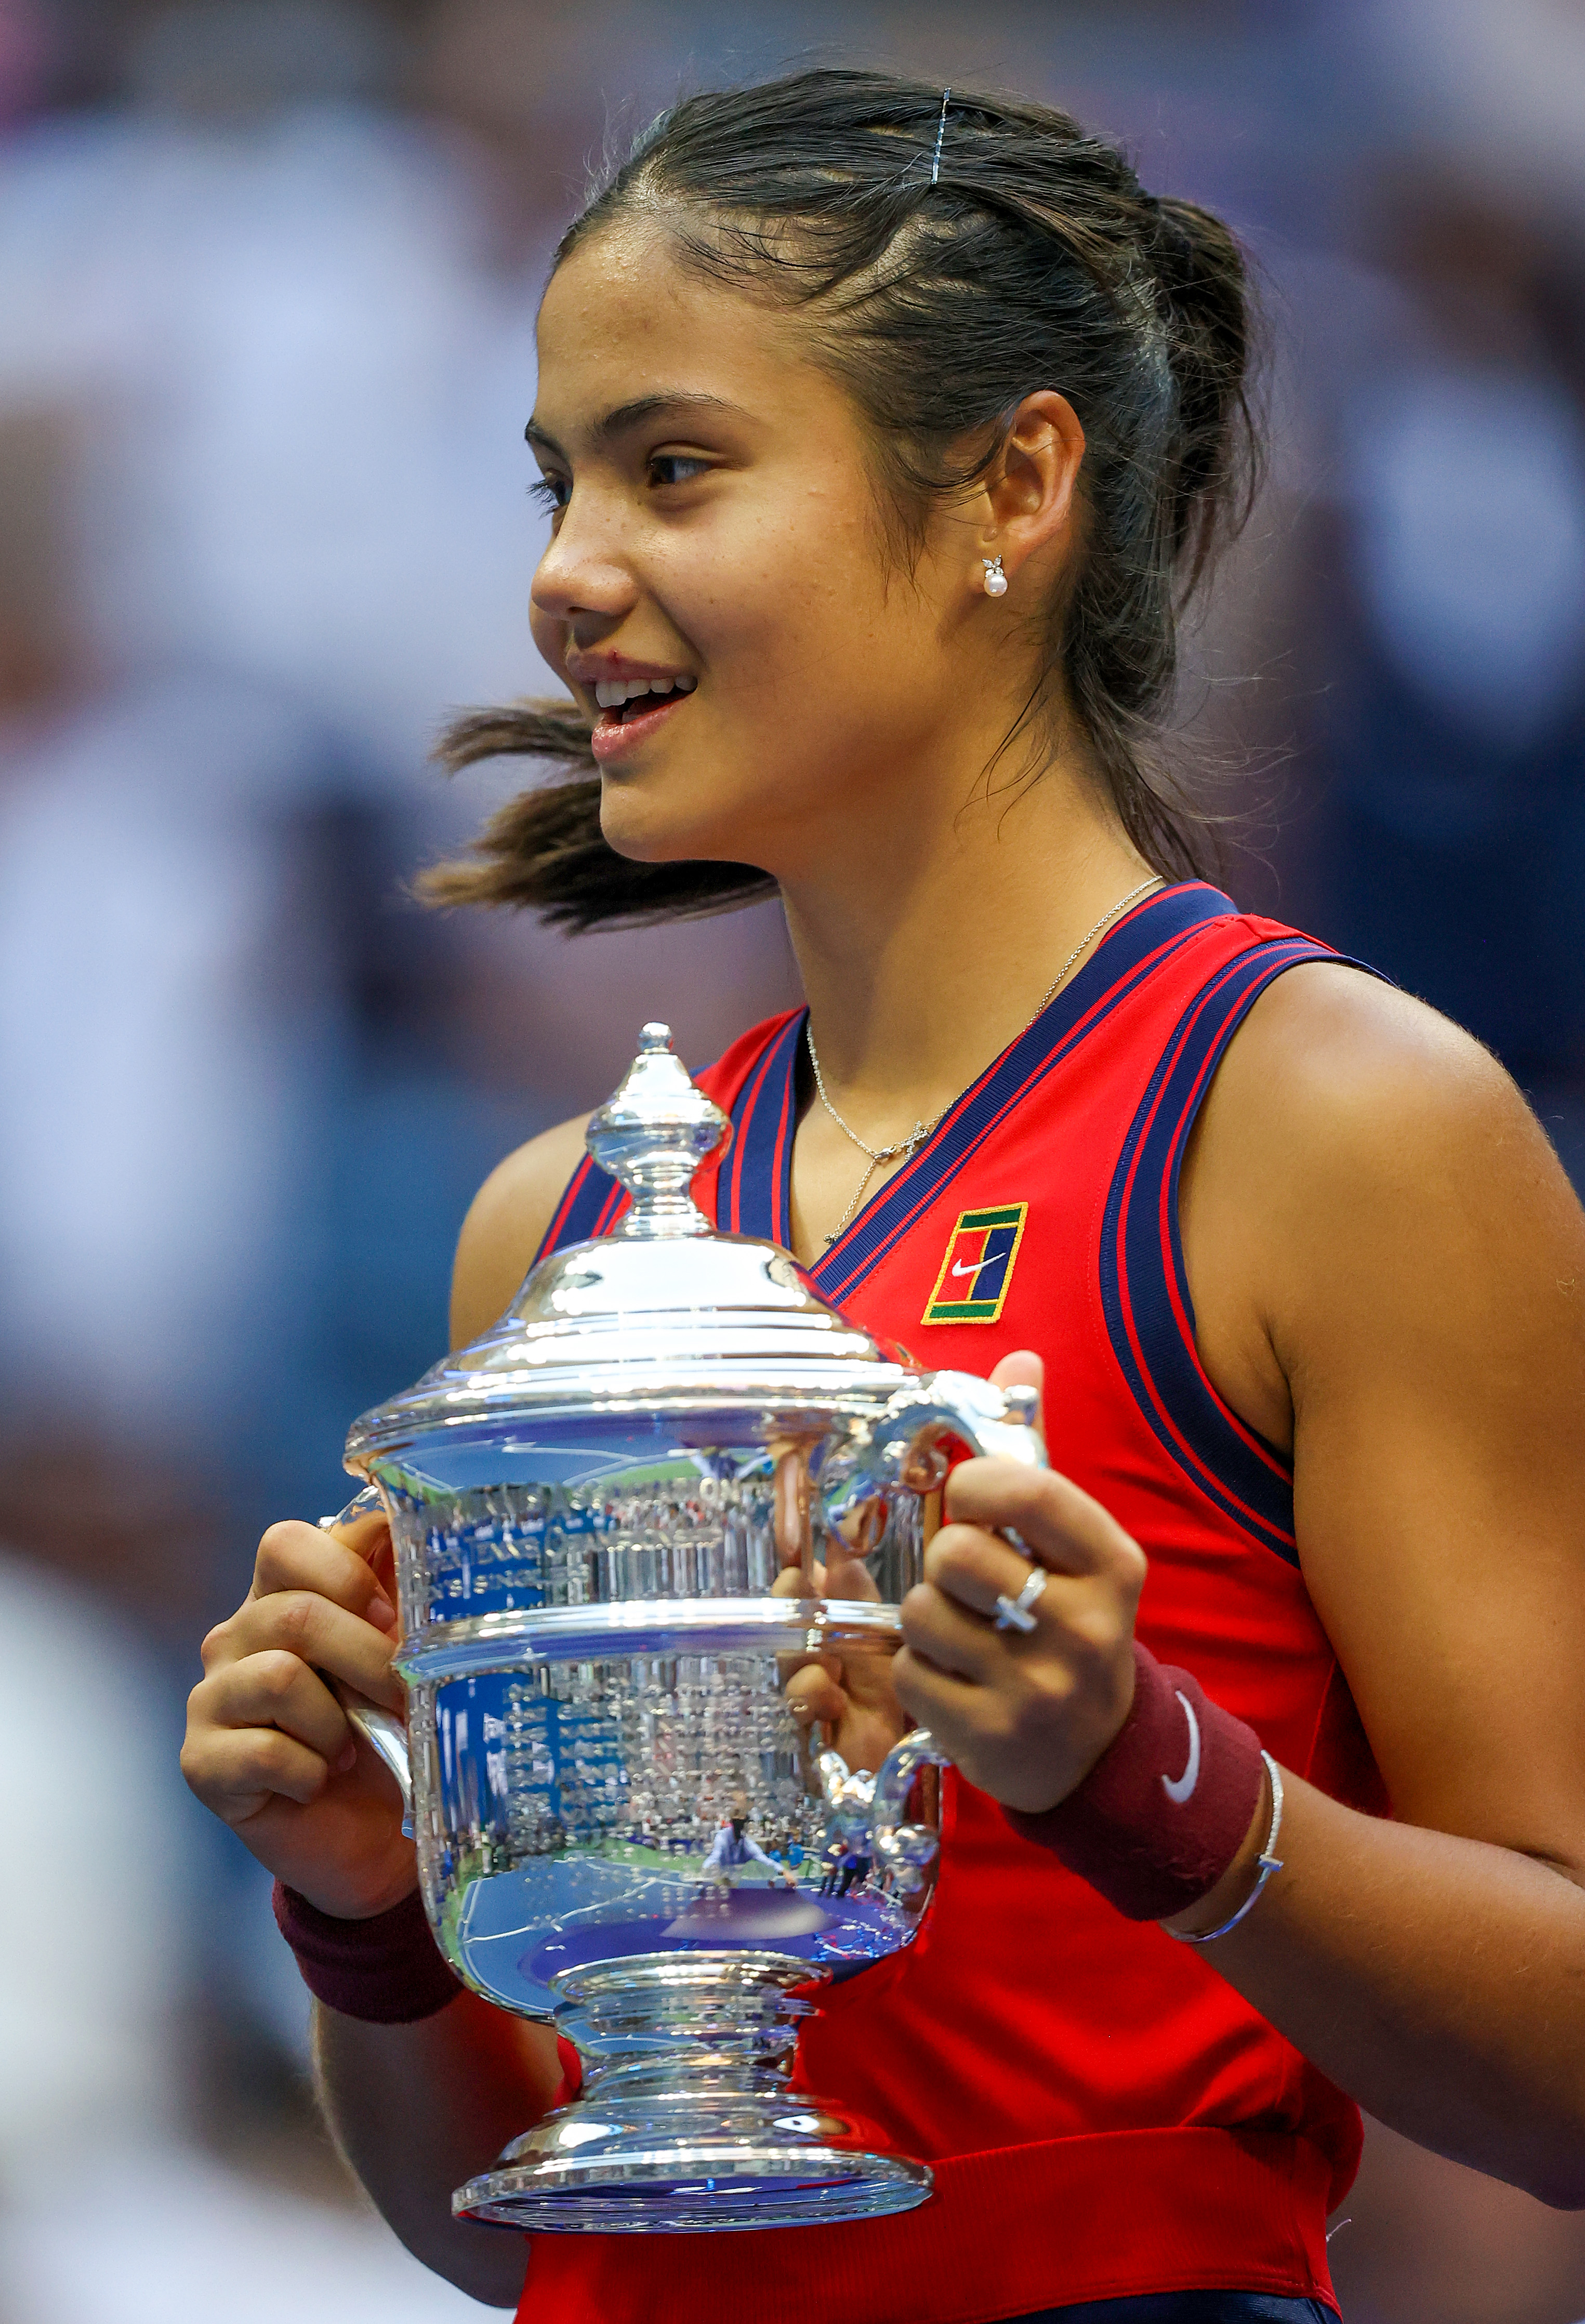 Emma Raducanu of Great Britain celebrates with the championship trophy after defeating Leylah Annie Fernandez of Canada during their Women's Singles final match on Day Thirteen of the 2021 US Open at the USTA Billie Jean King National Tennis Center on Sept. 11, 2021 in New York City. (Al Bello—Getty Images)